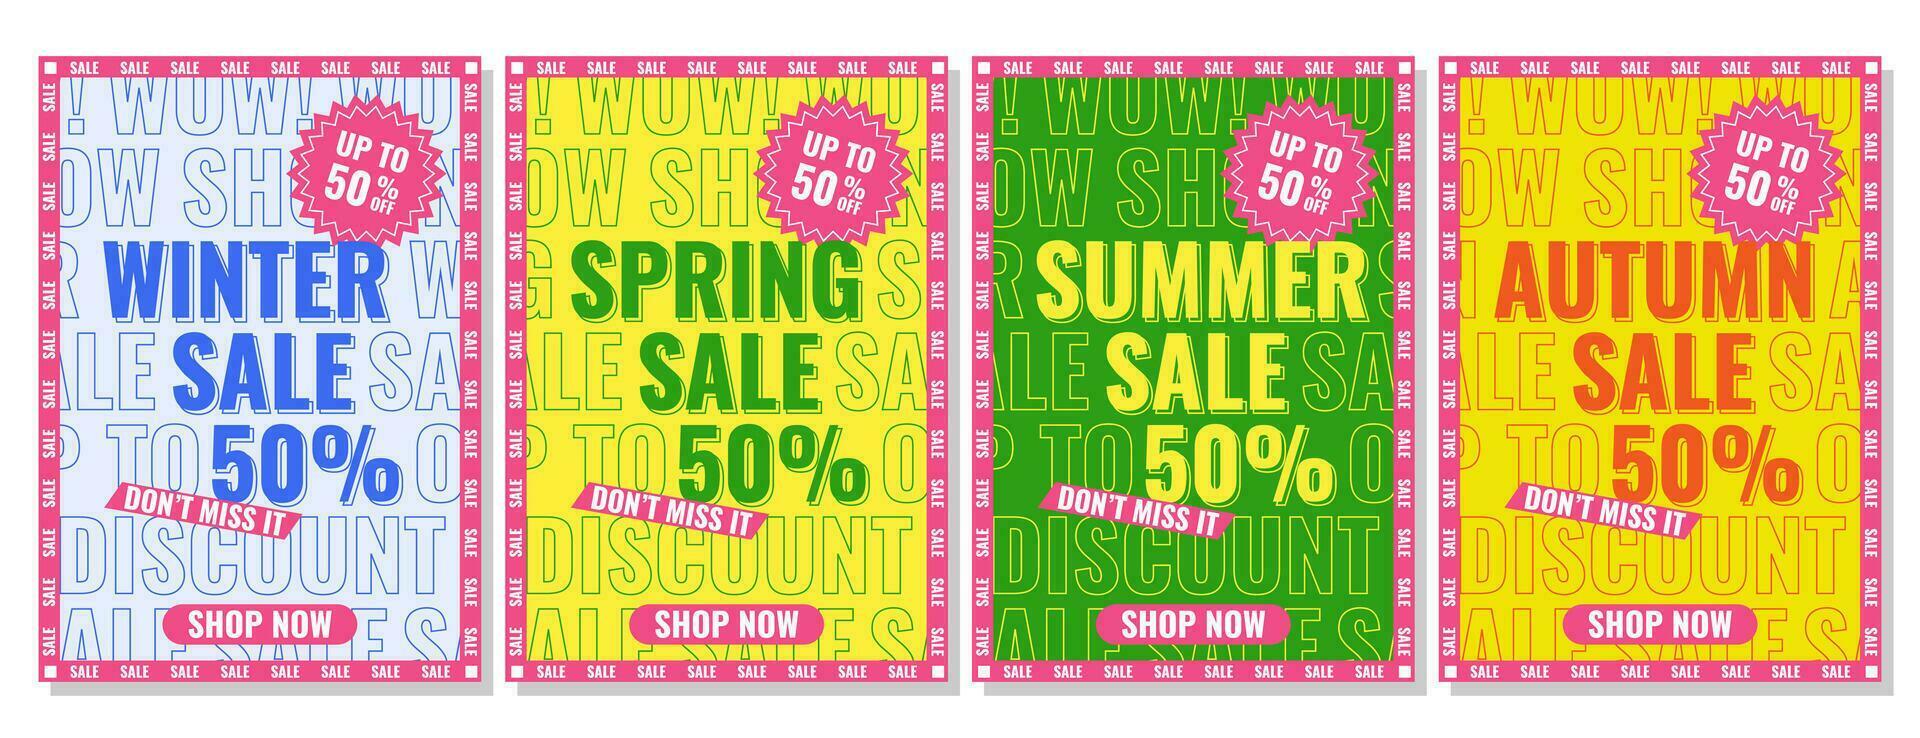 Set of posters season sale. Winter, spring, summer, autumn. Retro, y2k style. Don't miss it, shop now, discount. Vector bright background, banner, flyer. A4 format